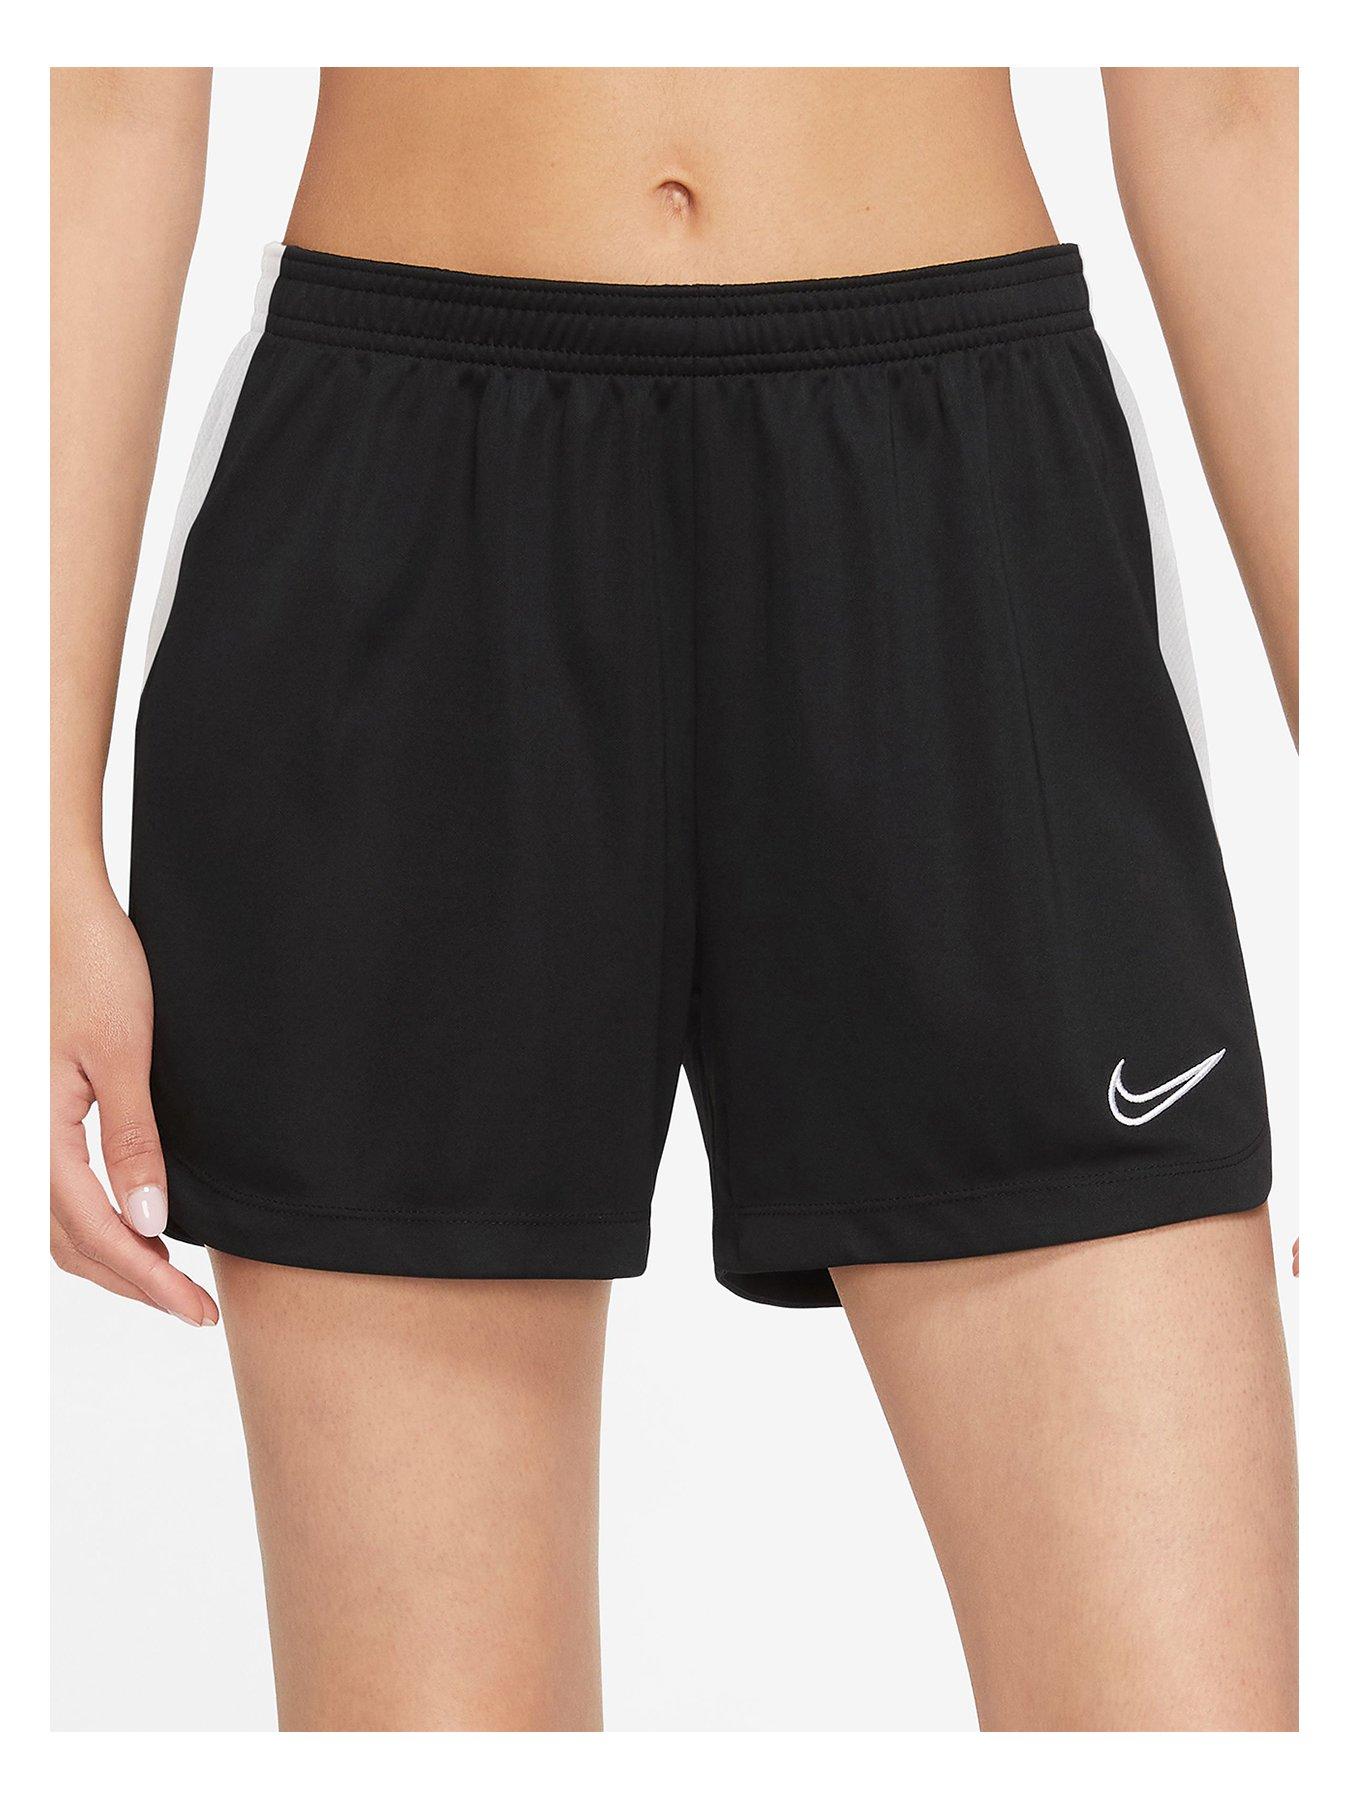 Under Armour Women's Fusion 5-Inch Shorts, (001) Black / / White